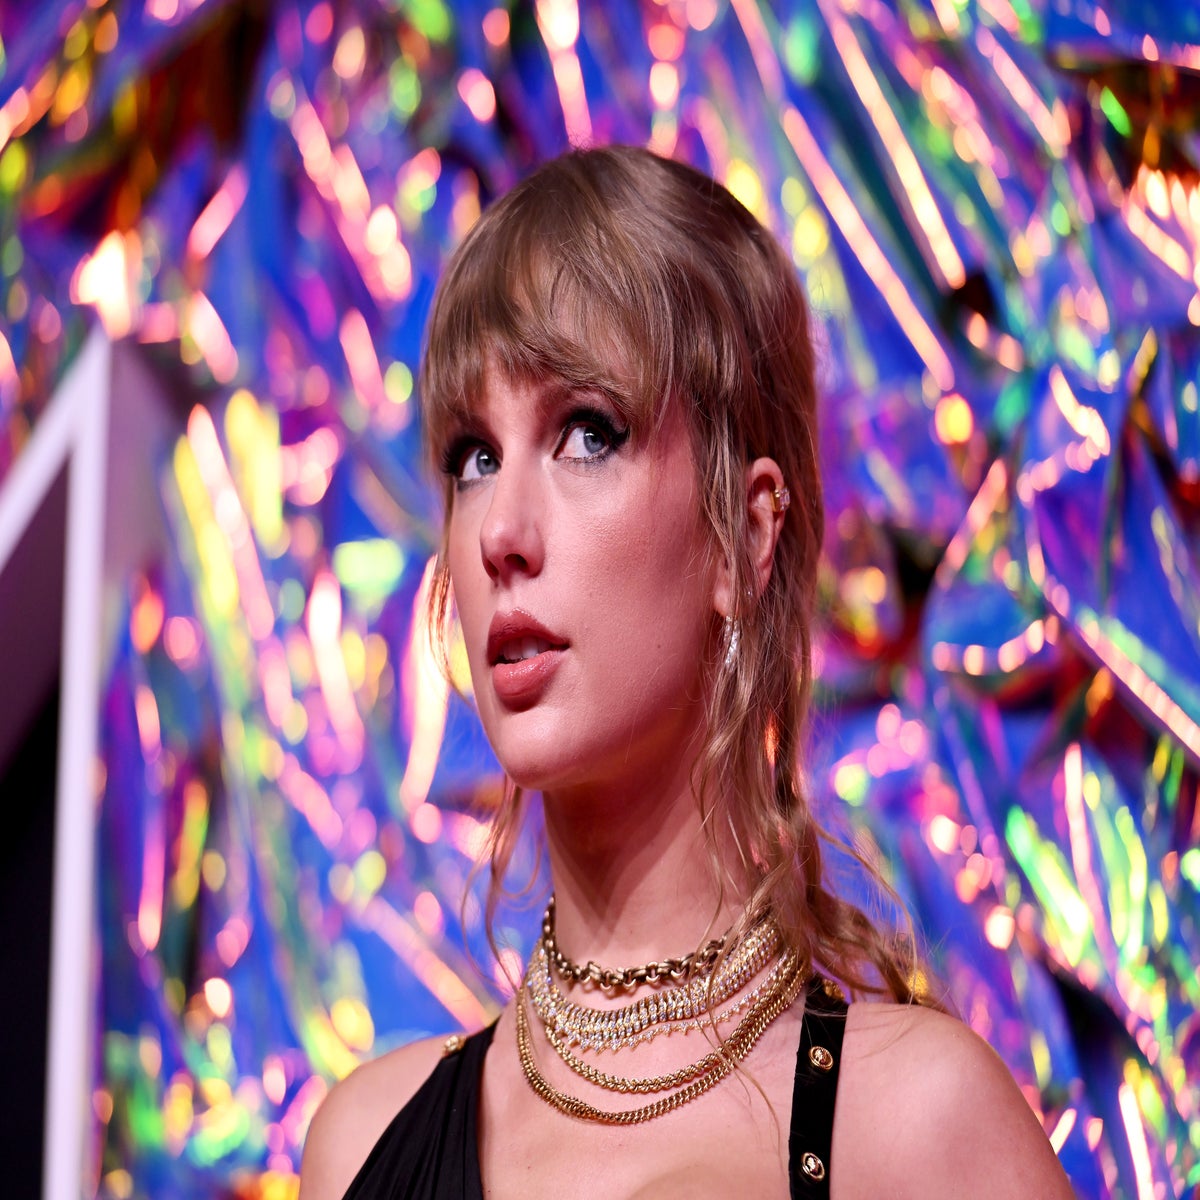 Taylor Swift Re-Recorded Albums Pushes Music Industry to Change Rules